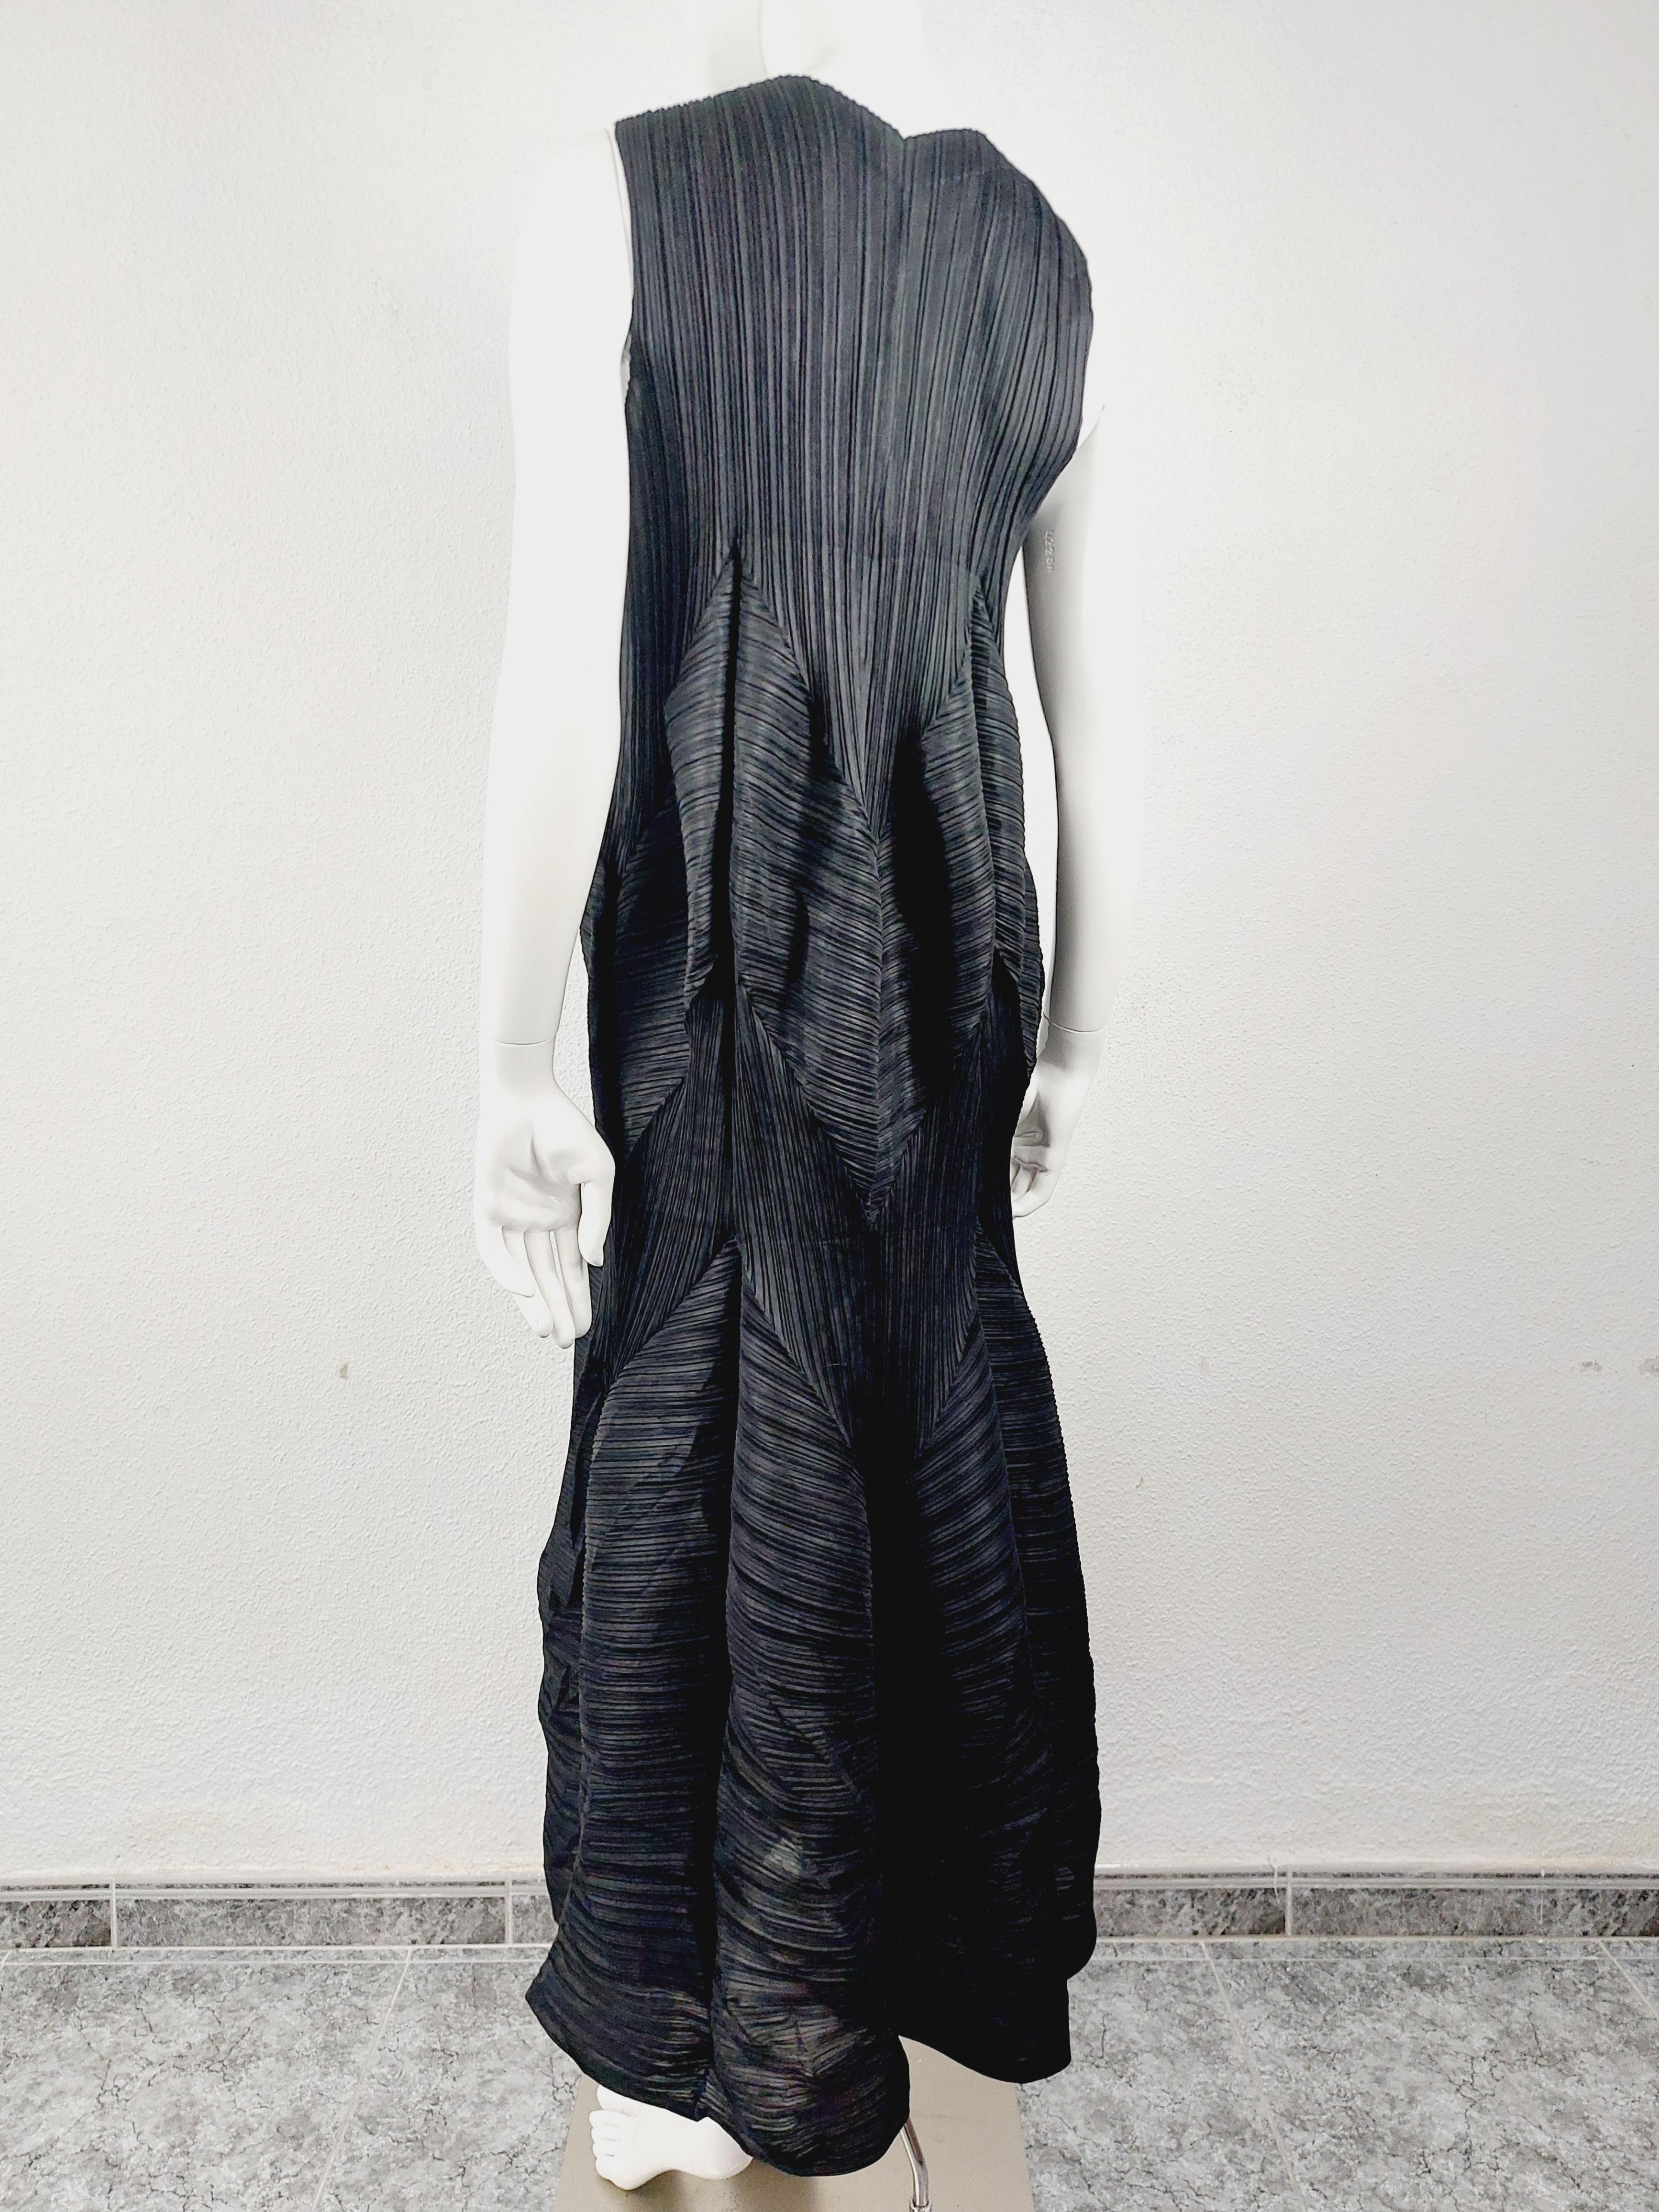 Issey Miyake Pleats Please Origami Ruffled Japanese Kimono Black Long Maxi Sleeveless Pleated dress
Soft folds further the rich dimension of this elegantly draped maxi dress featuring Issey Miyake's signature garment-pleating for a wrinkle-resistant